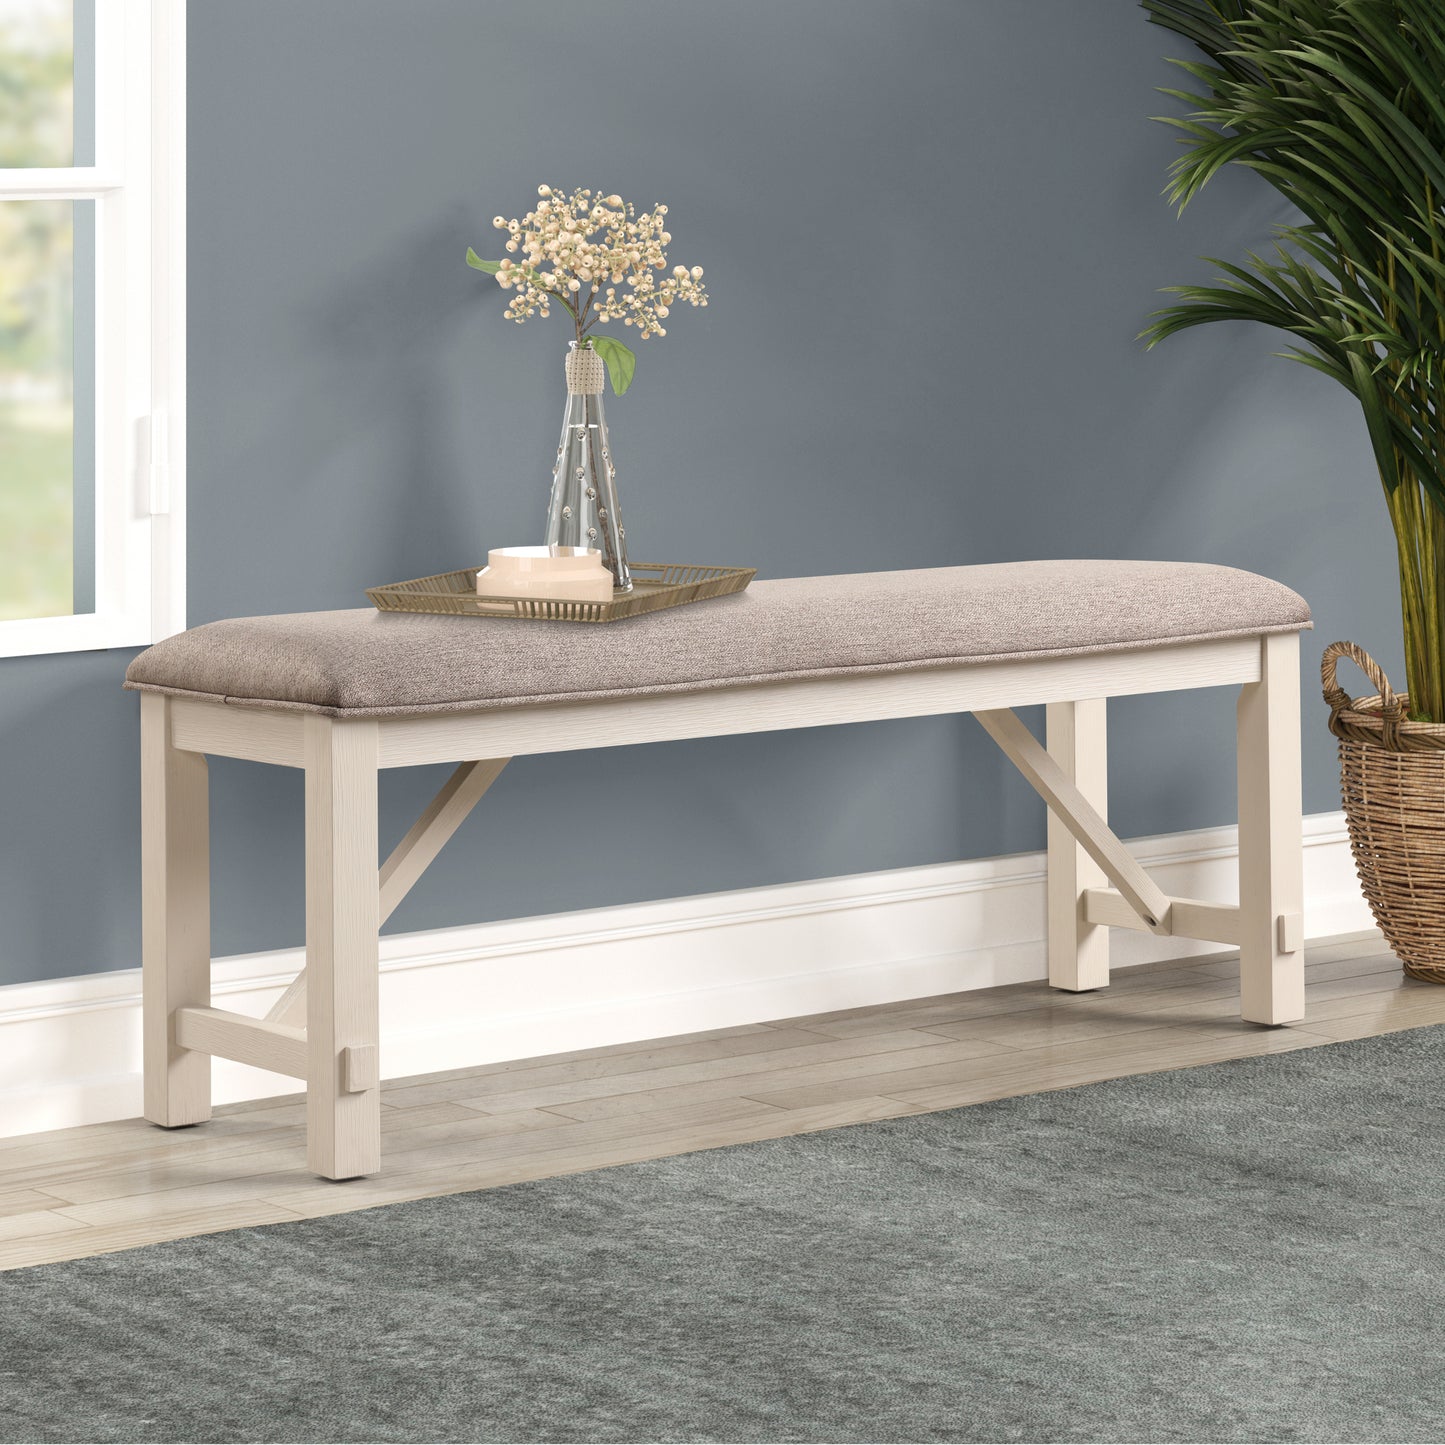 Roundhill Furniture Fasena Off White Solid Wood Upholstered Bench